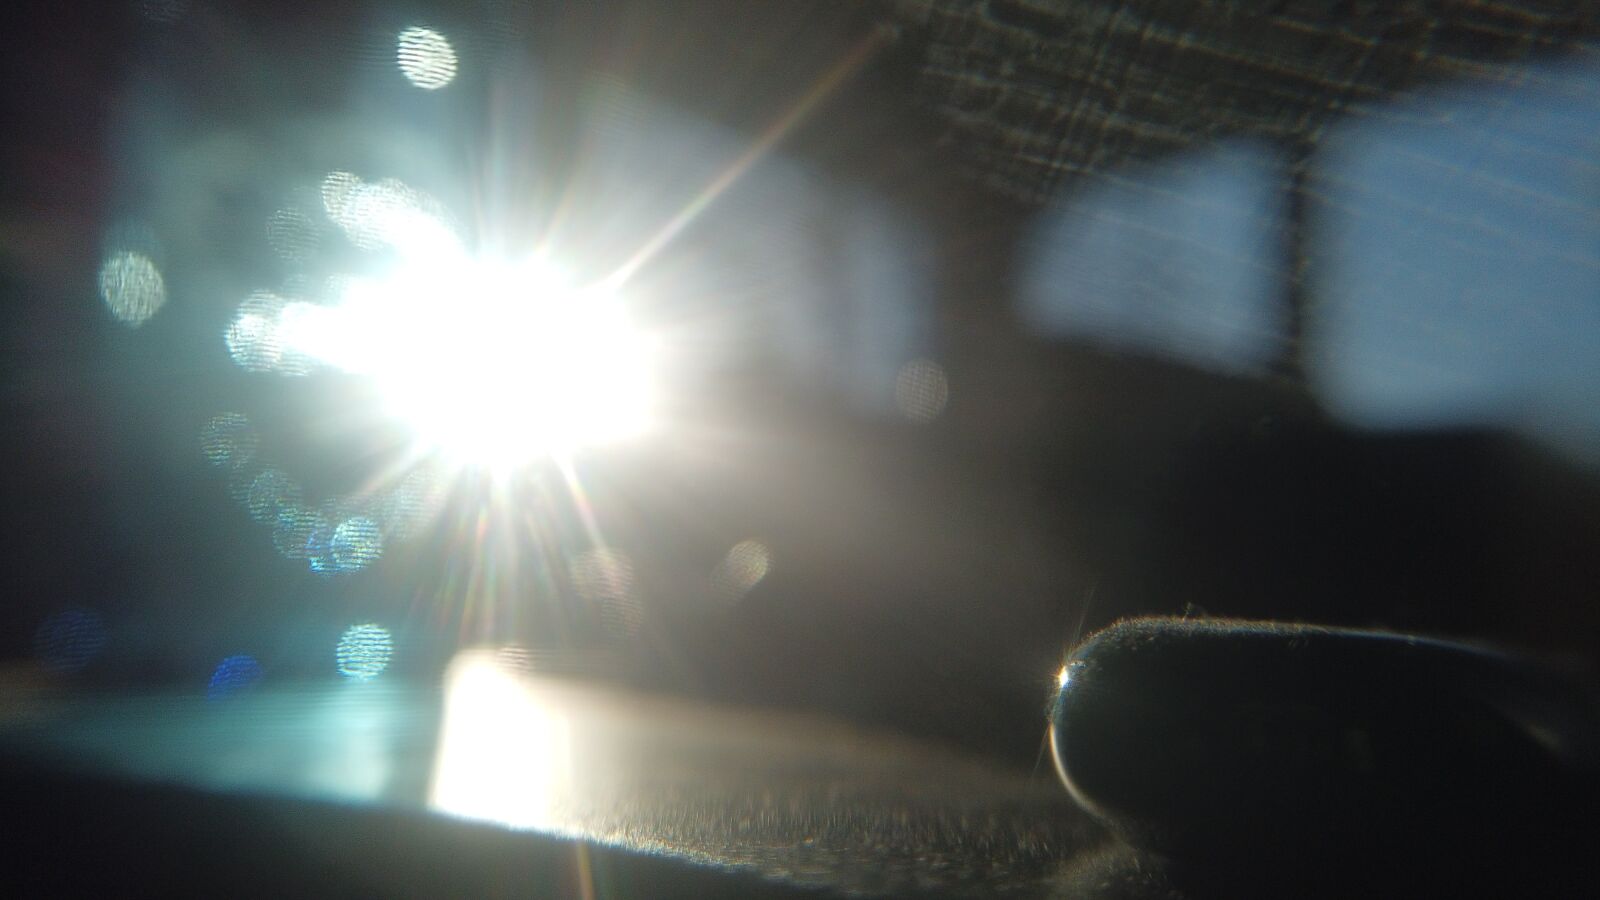 DJI Osmo Pocket sample photo. Light, blur, out of photography